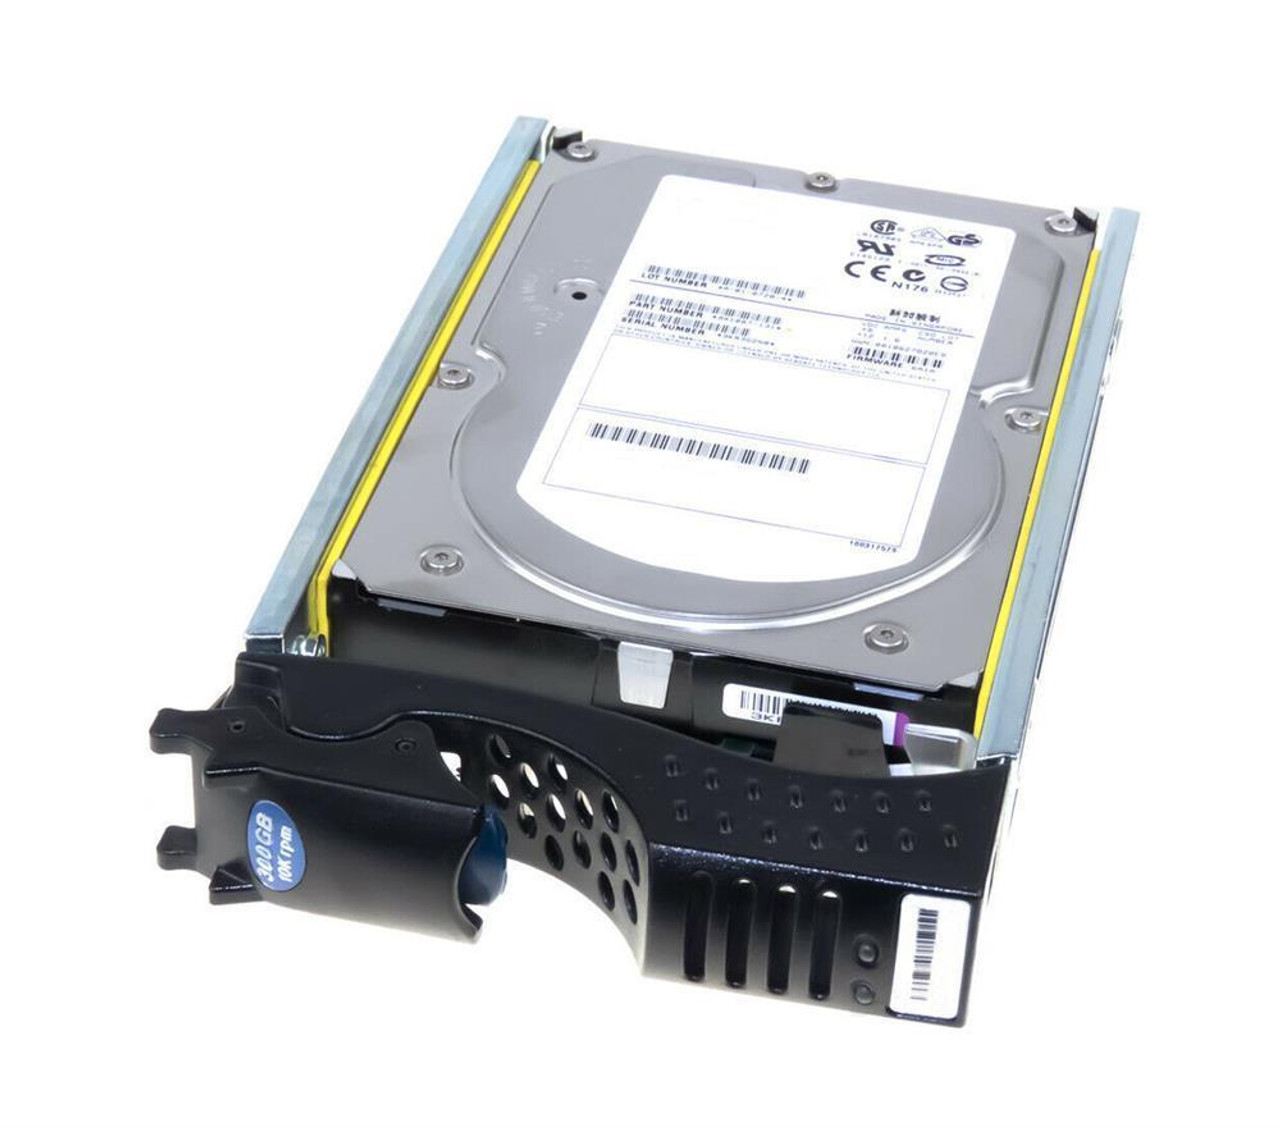 005048625 EMC 300GB 10000RPM Fibre Channel 2Gbps 16MB Cache 3.5-inch Internal Hard Drive for CLARiiON CX3/ CX Series Storage Systems